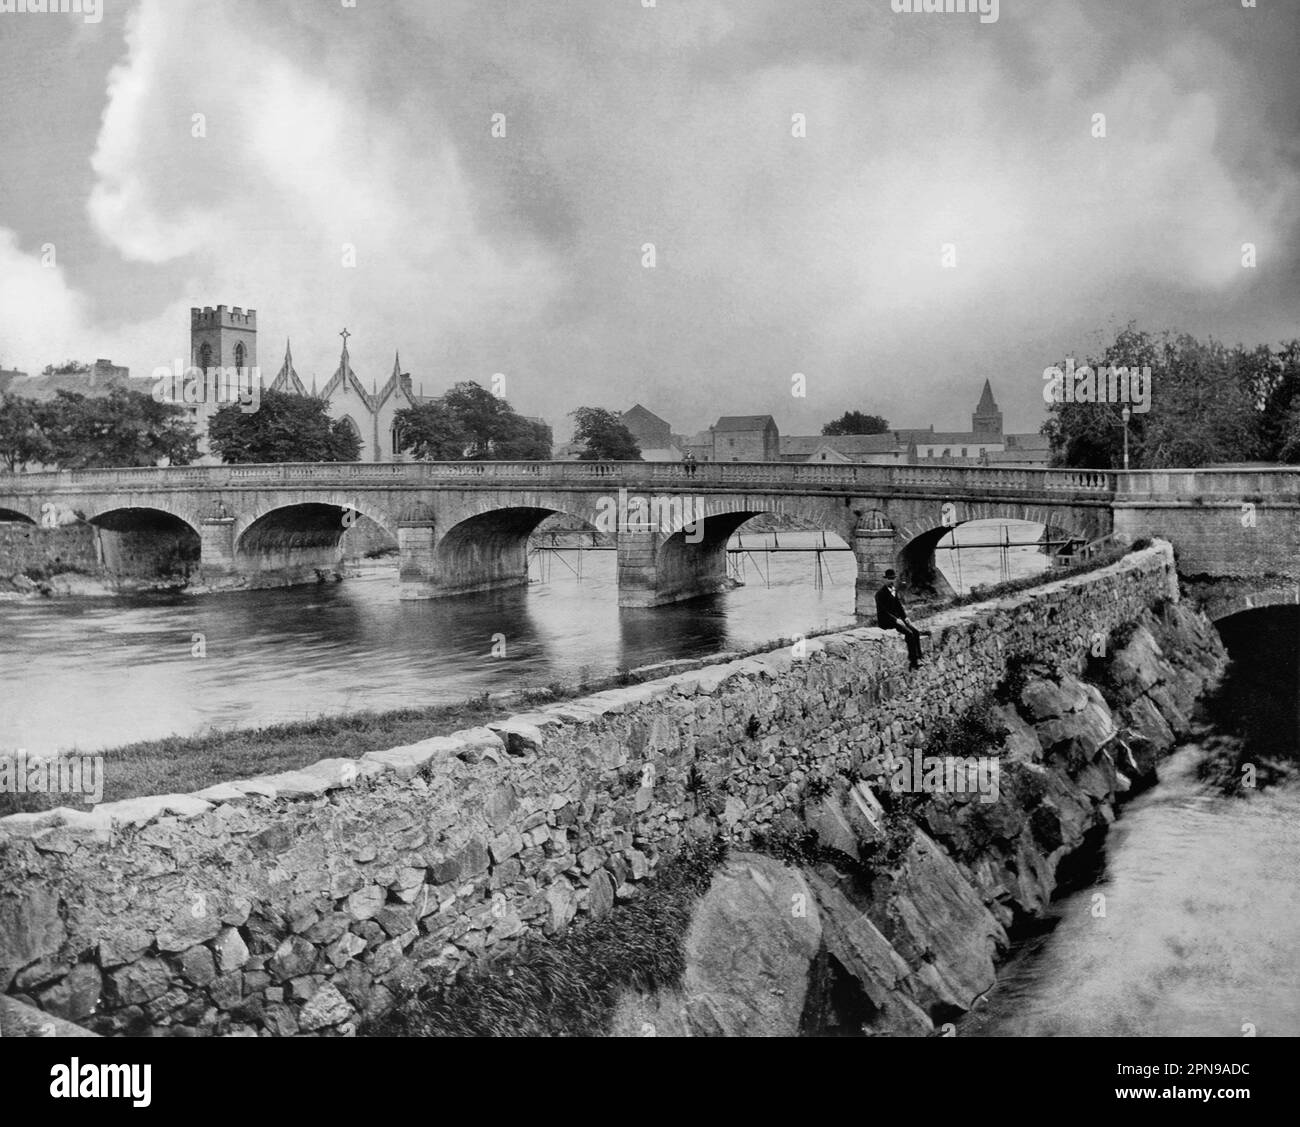 A late 19th century view of the West Bridge over the Corrib River in Galway City, Ireland with Father Daly's Chapel on the far bank. A man of many talents, Father Daly was an industrious town commissioner, a member of the Lough Corrib Navigation Trustees, a candidate for Bishop of Galway and member of the Gas Board. He undertook a great deal of work during his long life and was for decades a leading citizen of the town. Stock Photo